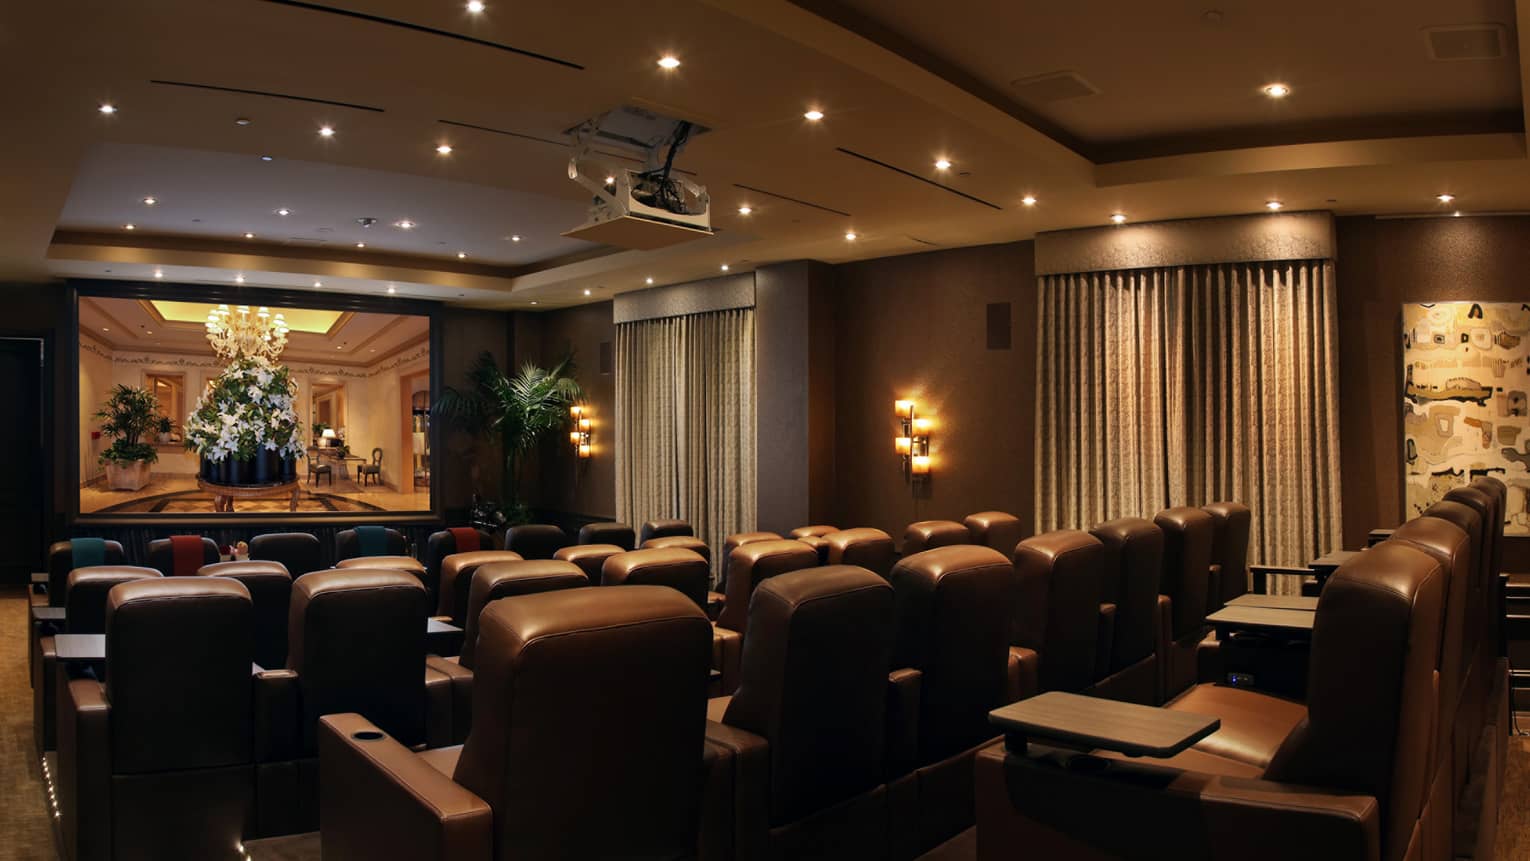 Rows of leather theatre chairs facing screen in movie screening room